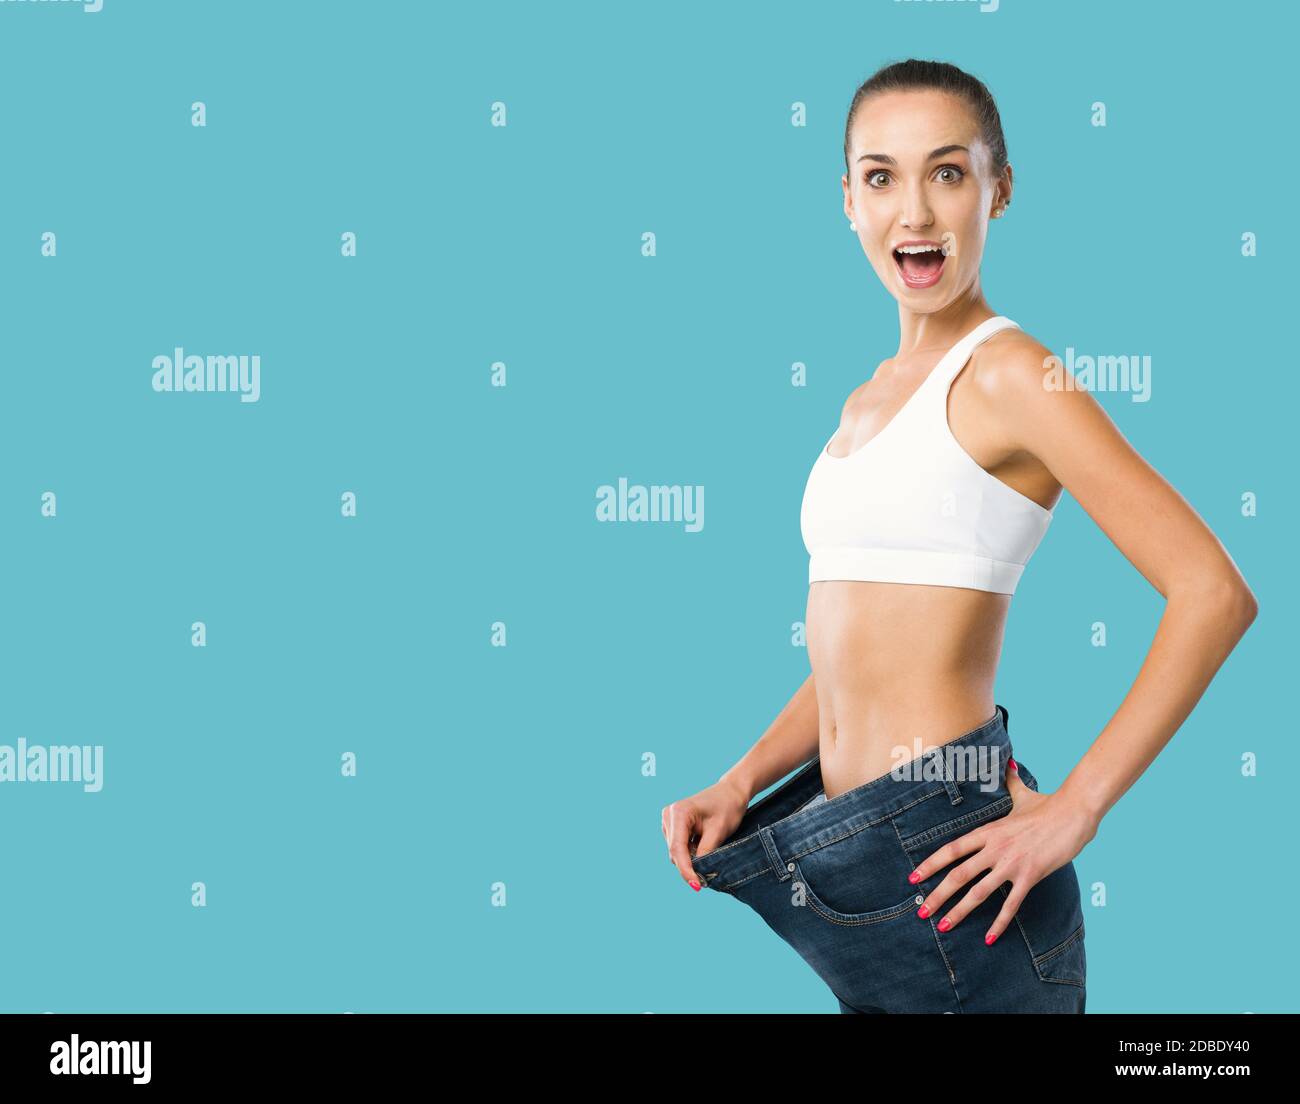 Happy woman showing her successful weight loss, her jeans are loose and she is slim, weight loss and fitness concept Stock Photo